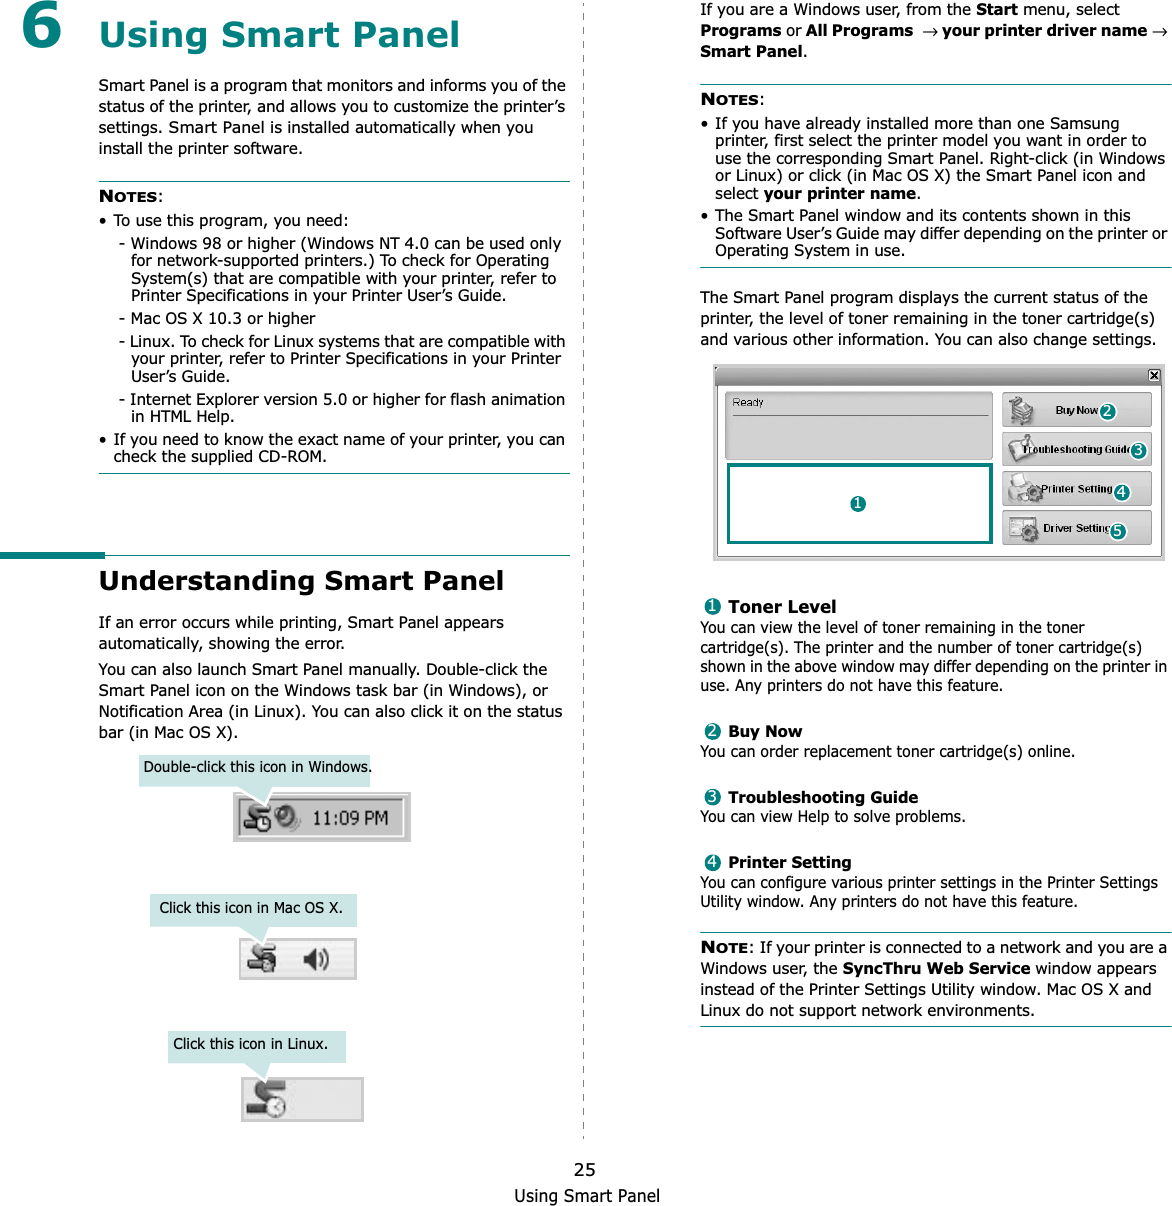 Using Smart Panel256Using Smart PanelSmart Panel is a program that monitors and informs you of the status of the printer, and allows you to customize the printer’s settings. Smart Panel is installed automatically when you install the printer software.NOTES:• To use this program, you need:- Windows 98 or higher (Windows NT 4.0 can be used only for network-supported printers.) To check for Operating System(s) that are compatible with your printer, refer to Printer Specifications in your Printer User’s Guide.- Mac OS X 10.3 or higher- Linux. To check for Linux systems that are compatible with your printer, refer to Printer Specifications in your Printer User’s Guide.- Internet Explorer version 5.0 or higher for flash animation in HTML Help.• If you need to know the exact name of your printer, you can check the supplied CD-ROM.Understanding Smart PanelIf an error occurs while printing, Smart Panel appears automatically, showing the error.You can also launch Smart Panel manually. Double-click the Smart Panel icon on the Windows task bar (in Windows), or Notification Area (in Linux). You can also click it on the status bar (in Mac OS X).Double-click this icon in Windows.Click this icon in Mac OS X.Click this icon in Linux.If you are a Windows user, from the Start menu, select Programs or All Programs→ your printer driver name→ Smart Panel.NOTES:• If you have already installed more than one Samsung printer, first select the printer model you want in order to use the corresponding Smart Panel. Right-click (in Windows or Linux) or click (in Mac OS X) the Smart Panel icon and select your printer name.• The Smart Panel window and its contents shown in this Software User’s Guide may differ depending on the printer or Operating System in use.The Smart Panel program displays the current status of the printer, the level of toner remaining in the toner cartridge(s) and various other information. You can also change settings.Toner LevelYou can view the level of toner remaining in the toner cartridge(s). The printer and the number of toner cartridge(s) shown in the above window may differ depending on the printer in use. Any printers do not have this feature.Buy NowYou can order replacement toner cartridge(s) online.Troubleshooting GuideYou can view Help to solve problems.Printer SettingYou can configure various printer settings in the Printer Settings Utility window. Any printers do not have this feature.NOTE: If your printer is connected to a network and you are a Windows user, the SyncThru Web Service window appears instead of the Printer Settings Utility window. Mac OS X and Linux do not support network environments.241531234